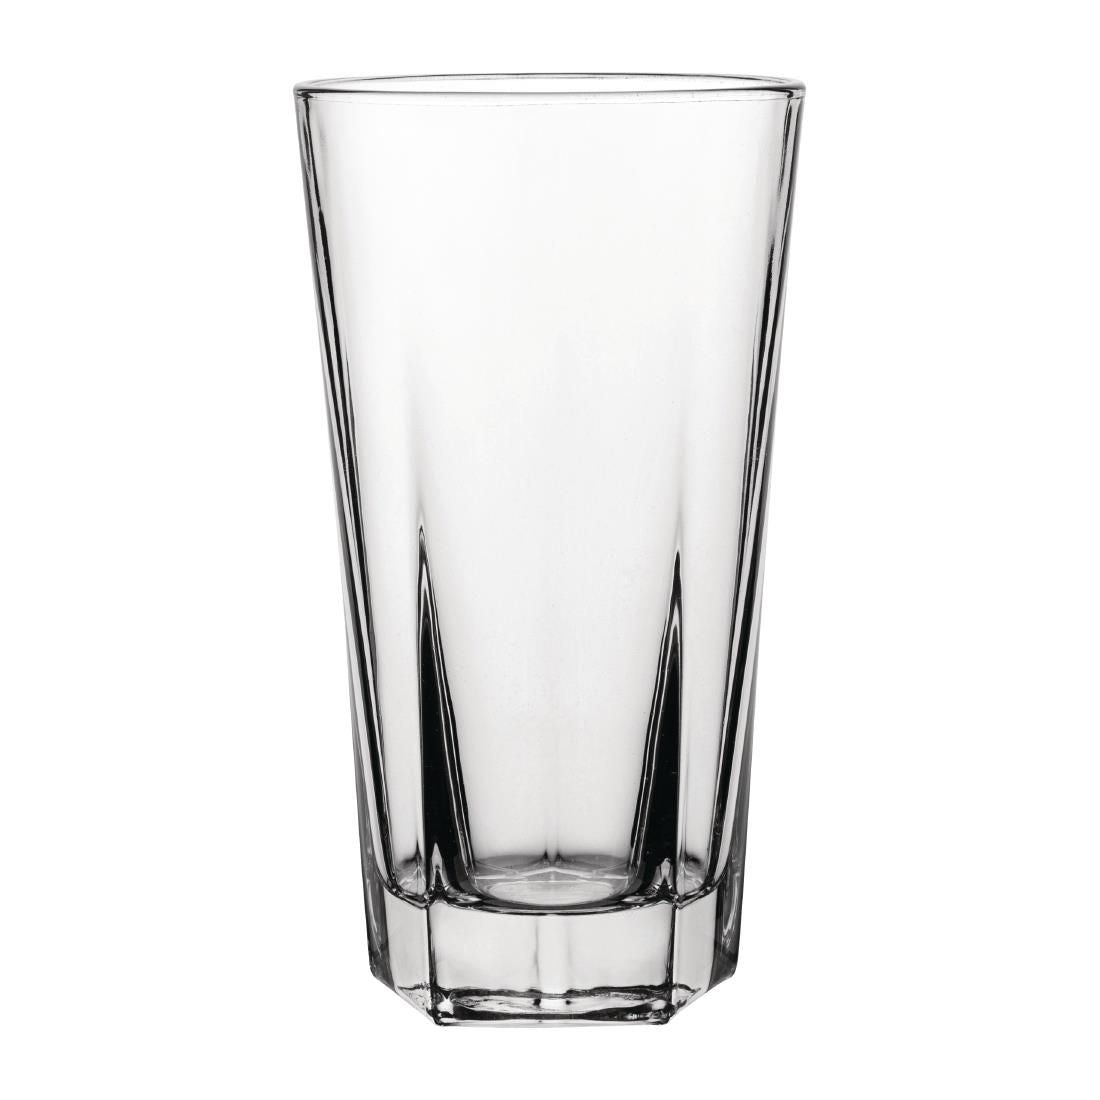 DH719 Utopia Caledonian Tall Hi Ball Glasses 280ml CE Marked (Pack of 12) JD Catering Equipment Solutions Ltd